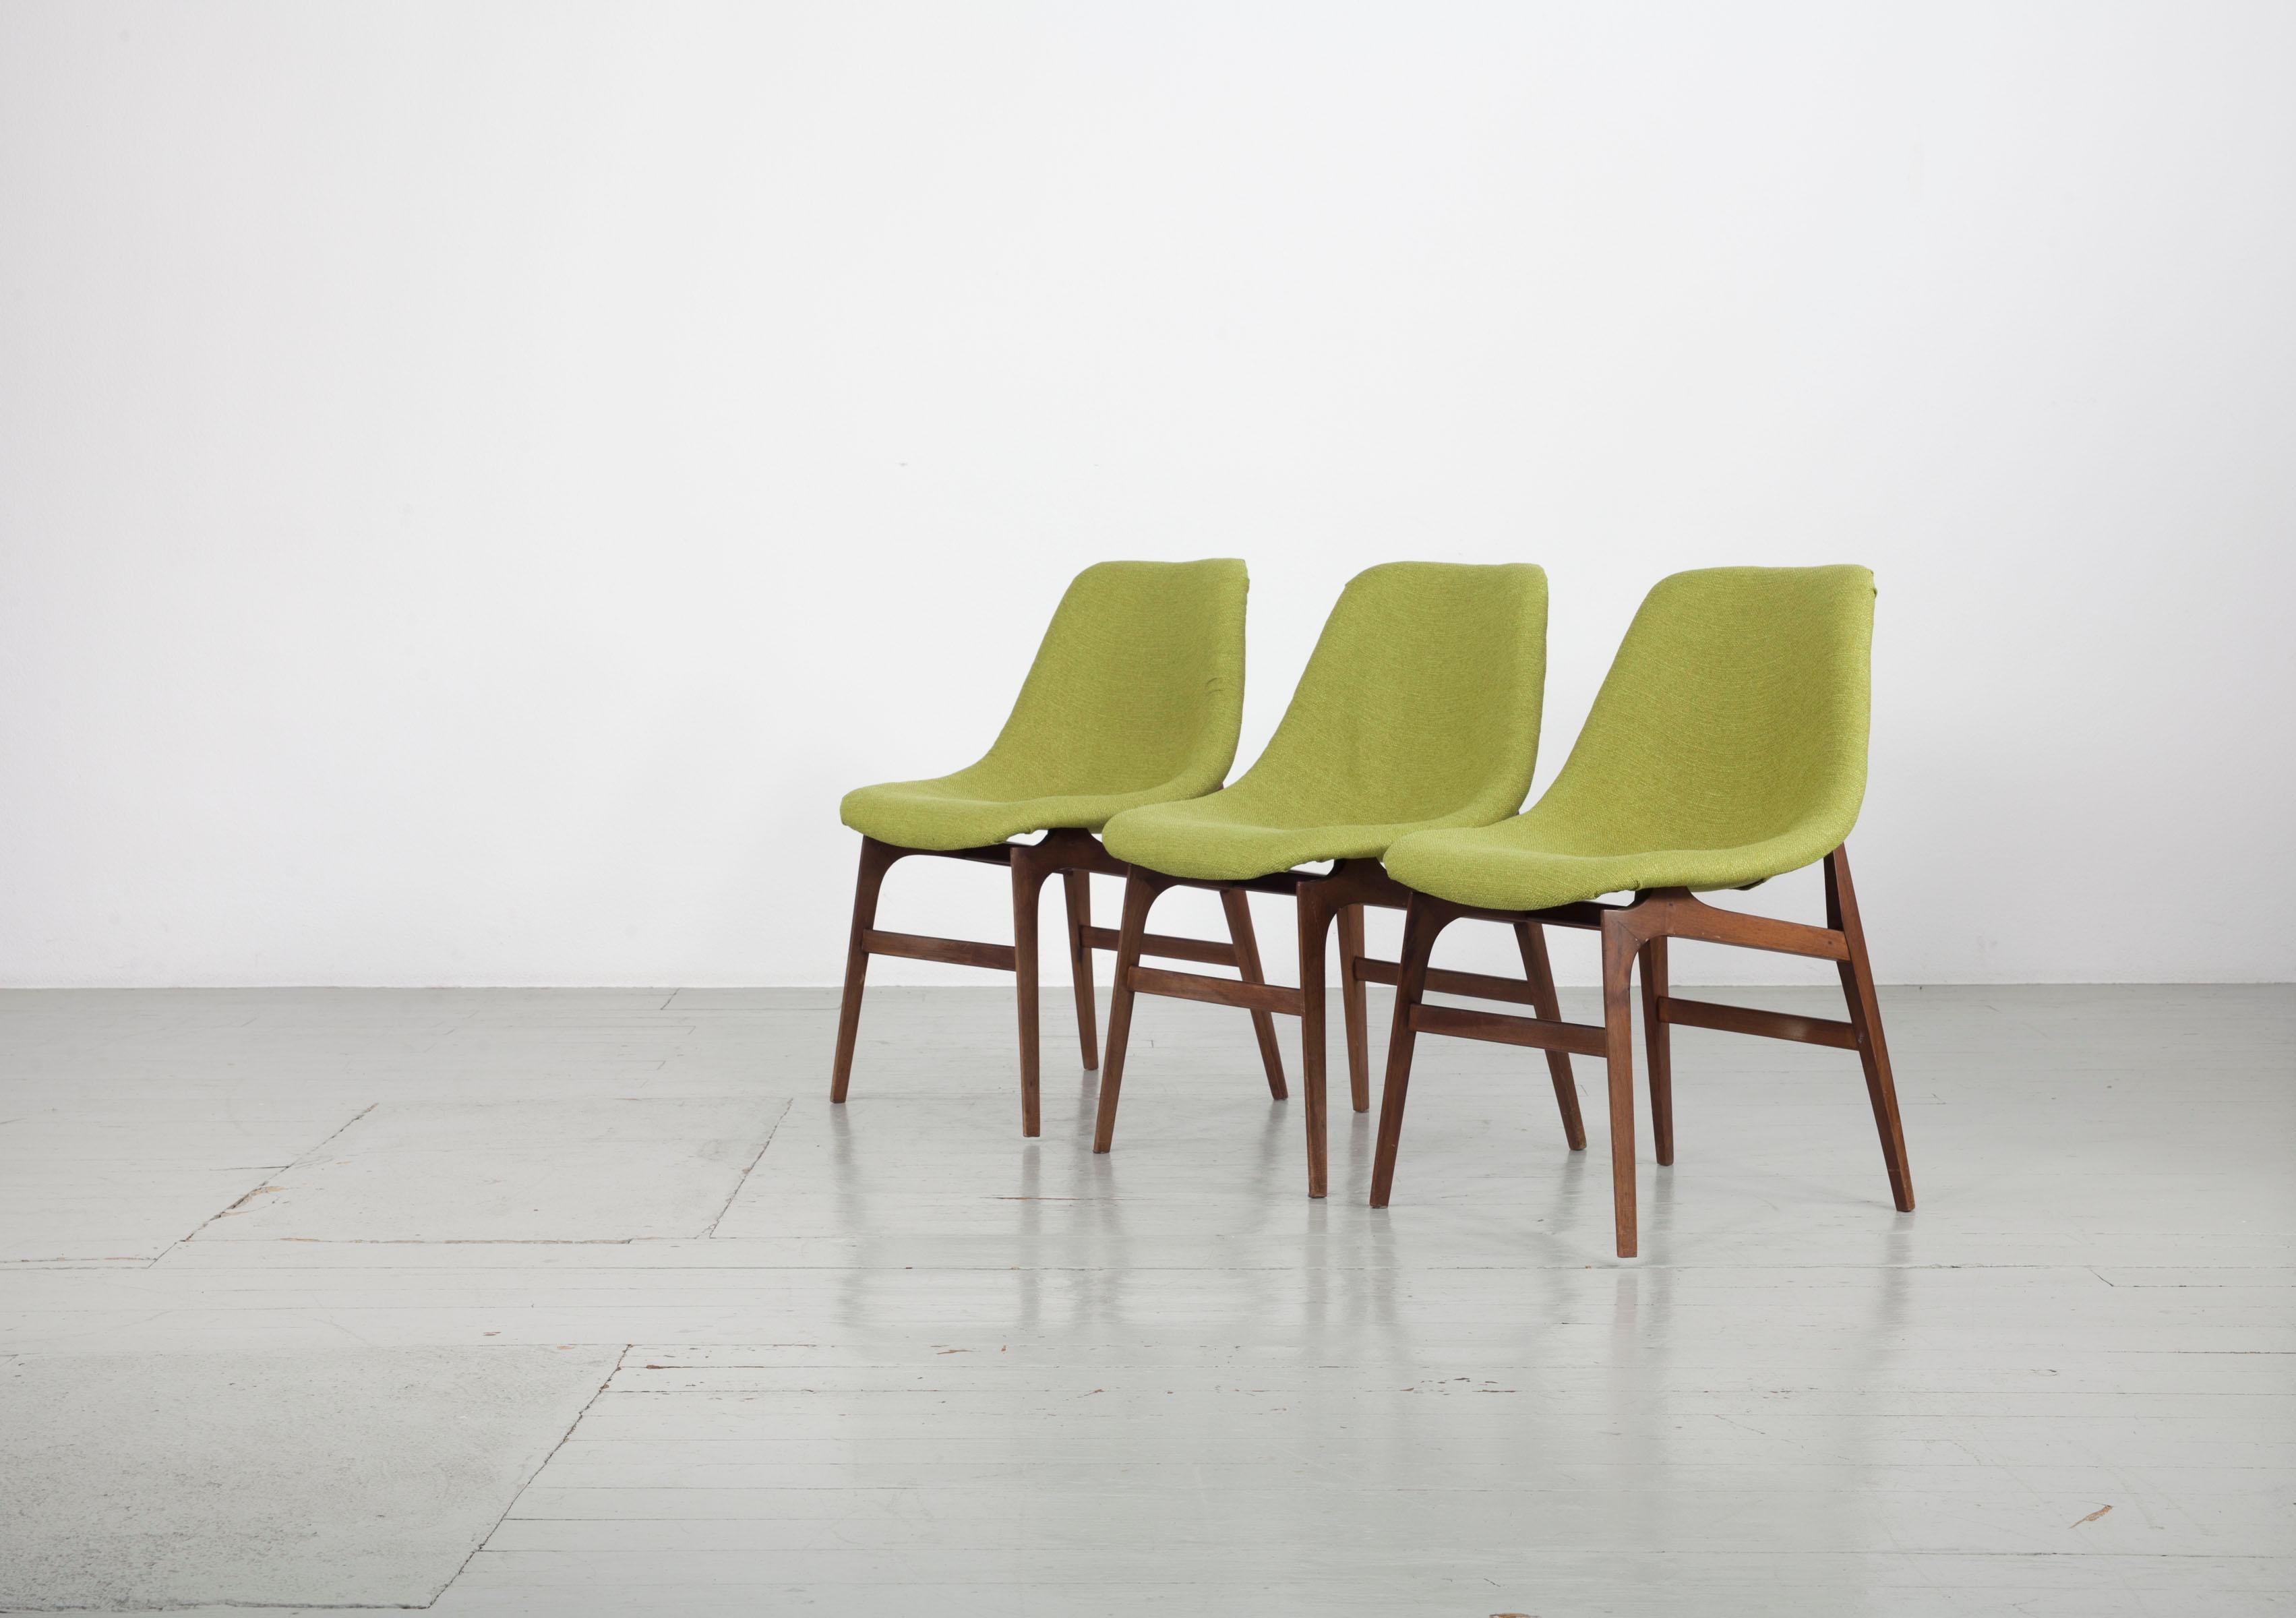 Fabric Set of 4 Busnelli Meda Teak Chairs, Italy 1960s For Sale